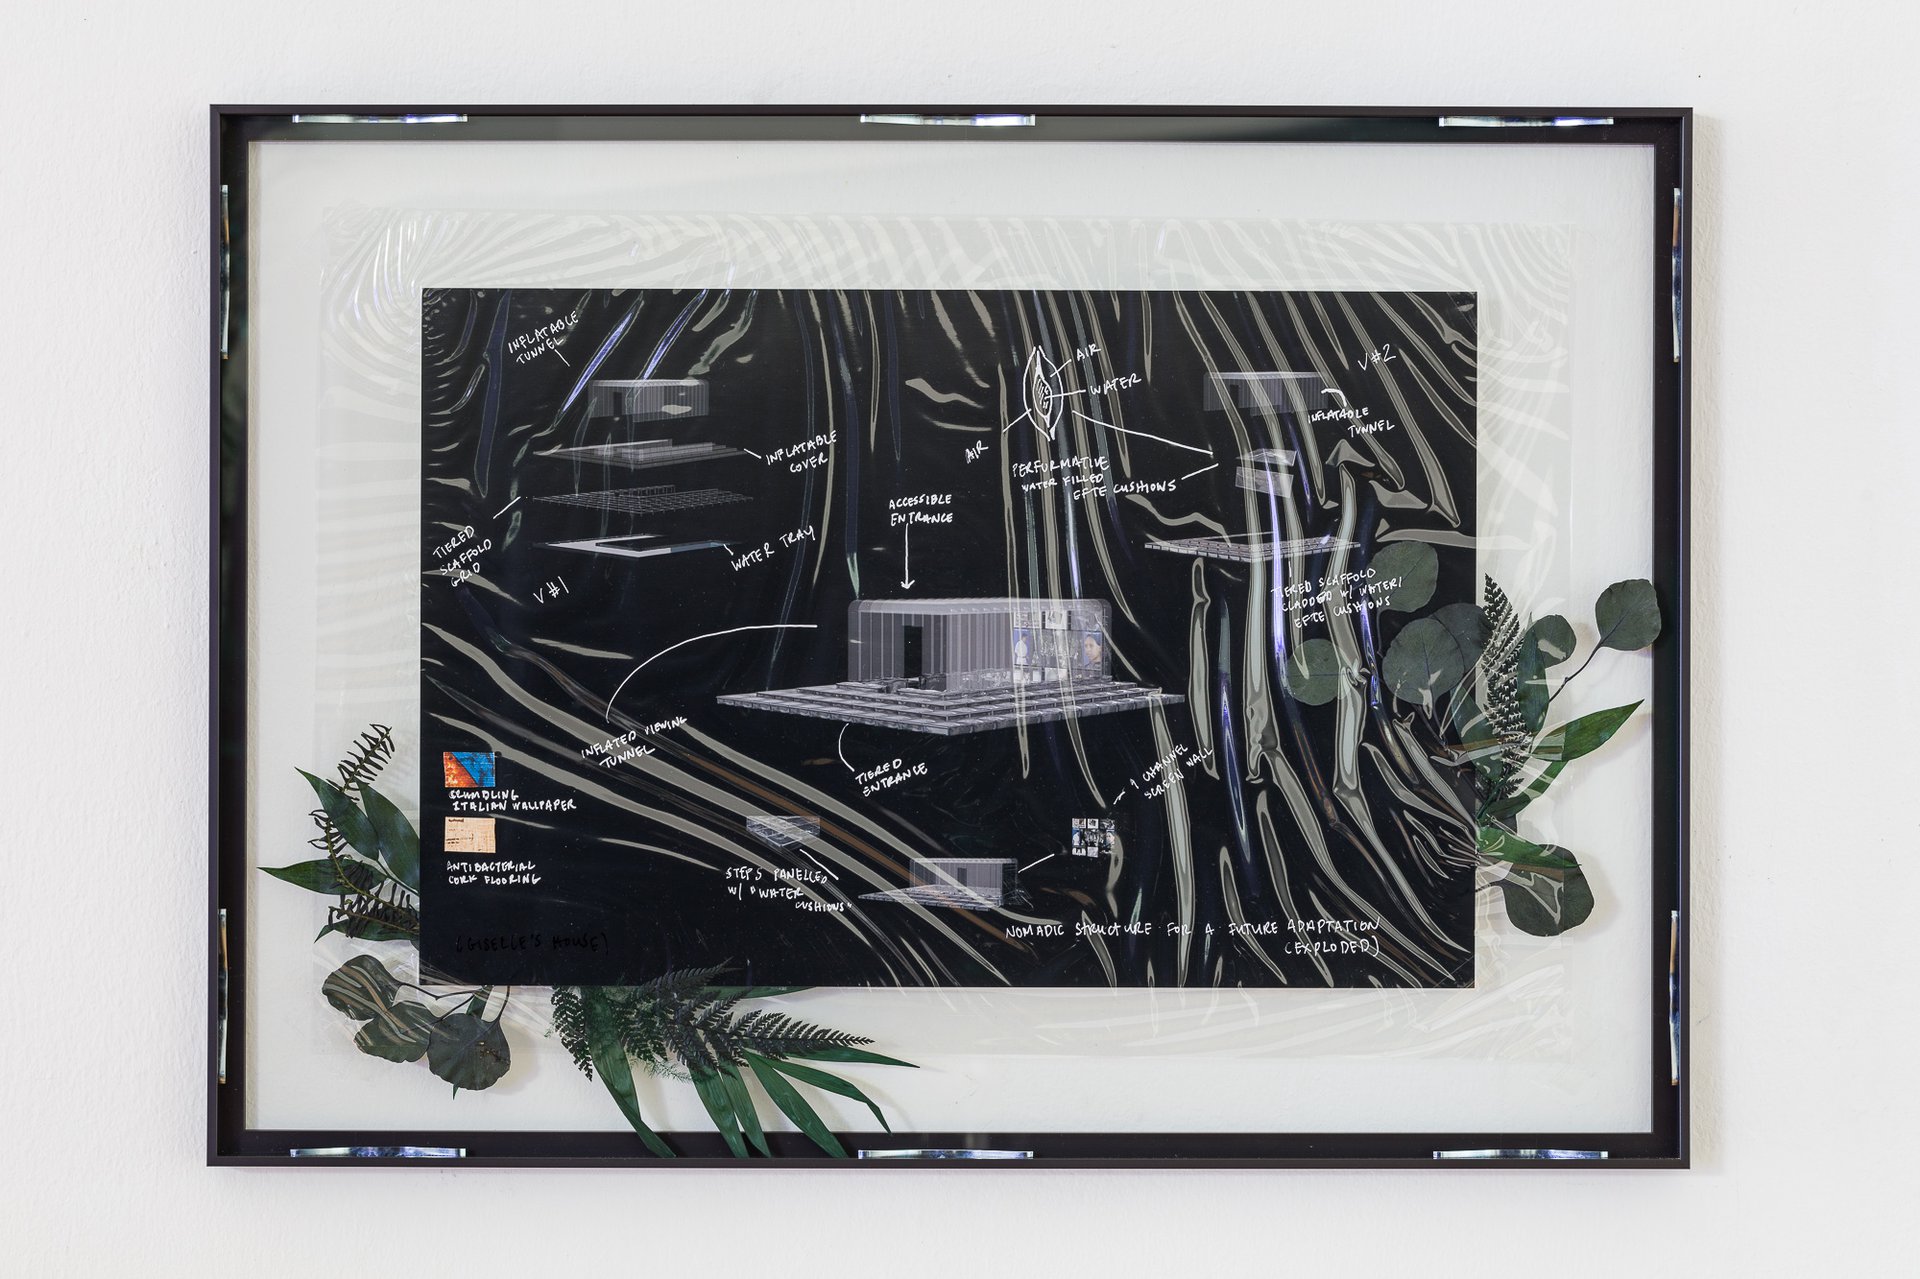 Cécile B. EvansNomadic Structure for a Future Adaptation (Exploded [Giselle&#x27;s House]), 2021C-type print, cellulose biofilm, paint, preserved plants, vintage Italian wallpaper, glass70 x 50 cm